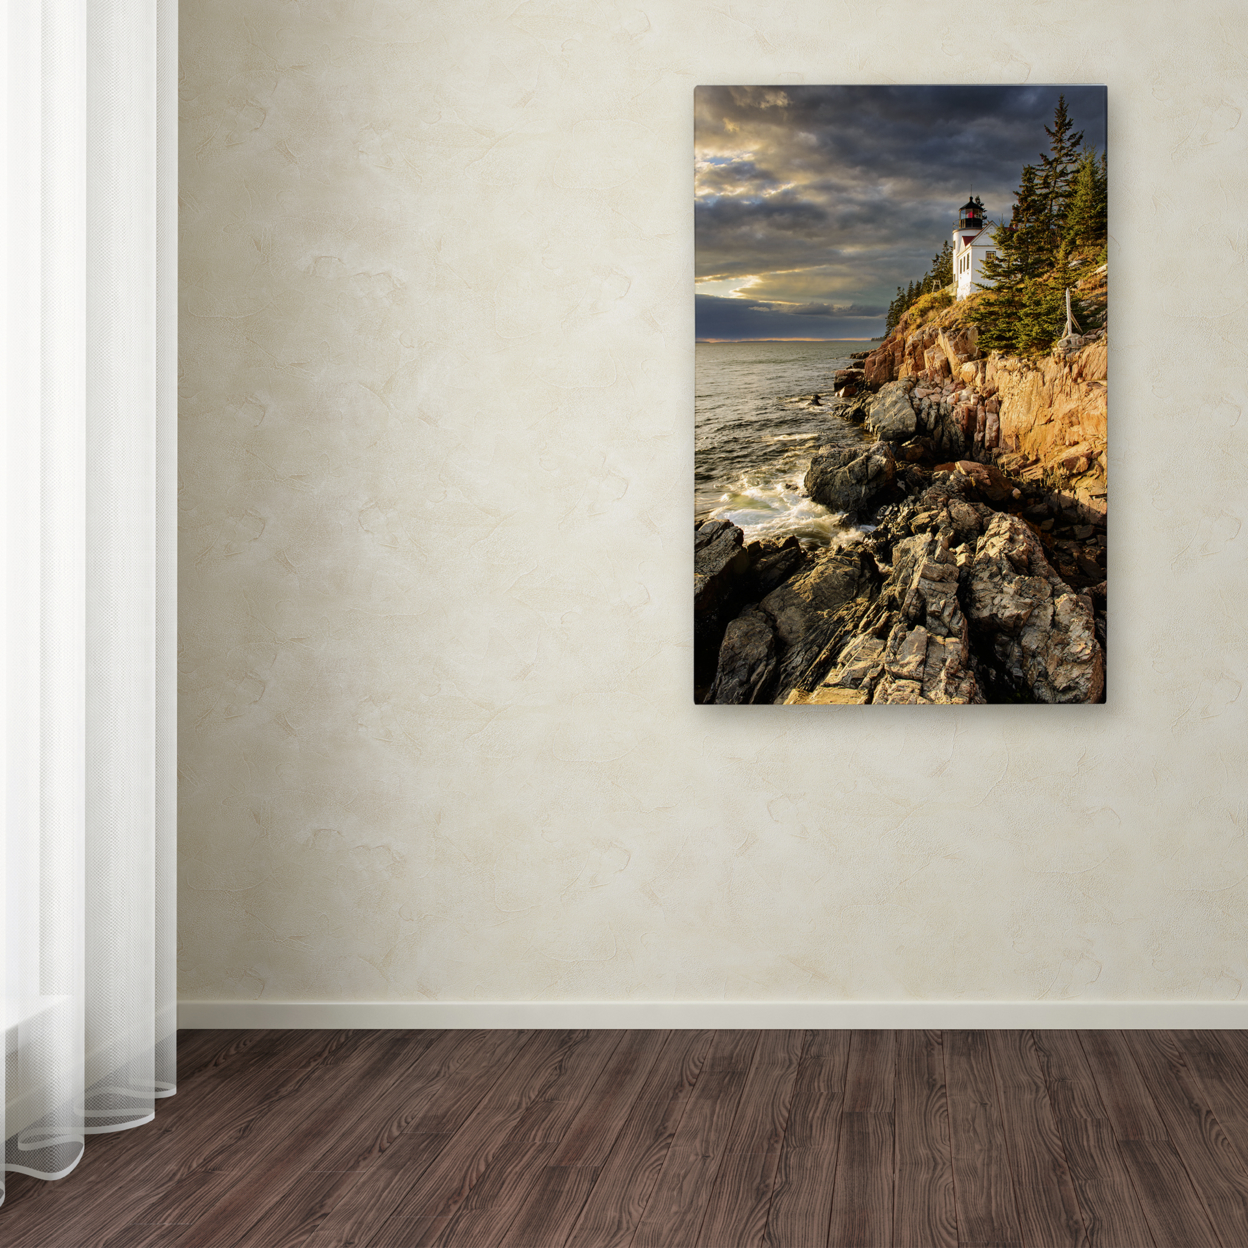 Michael Blanchette Photography 'On The Bluff' Canvas Art 16 X 24